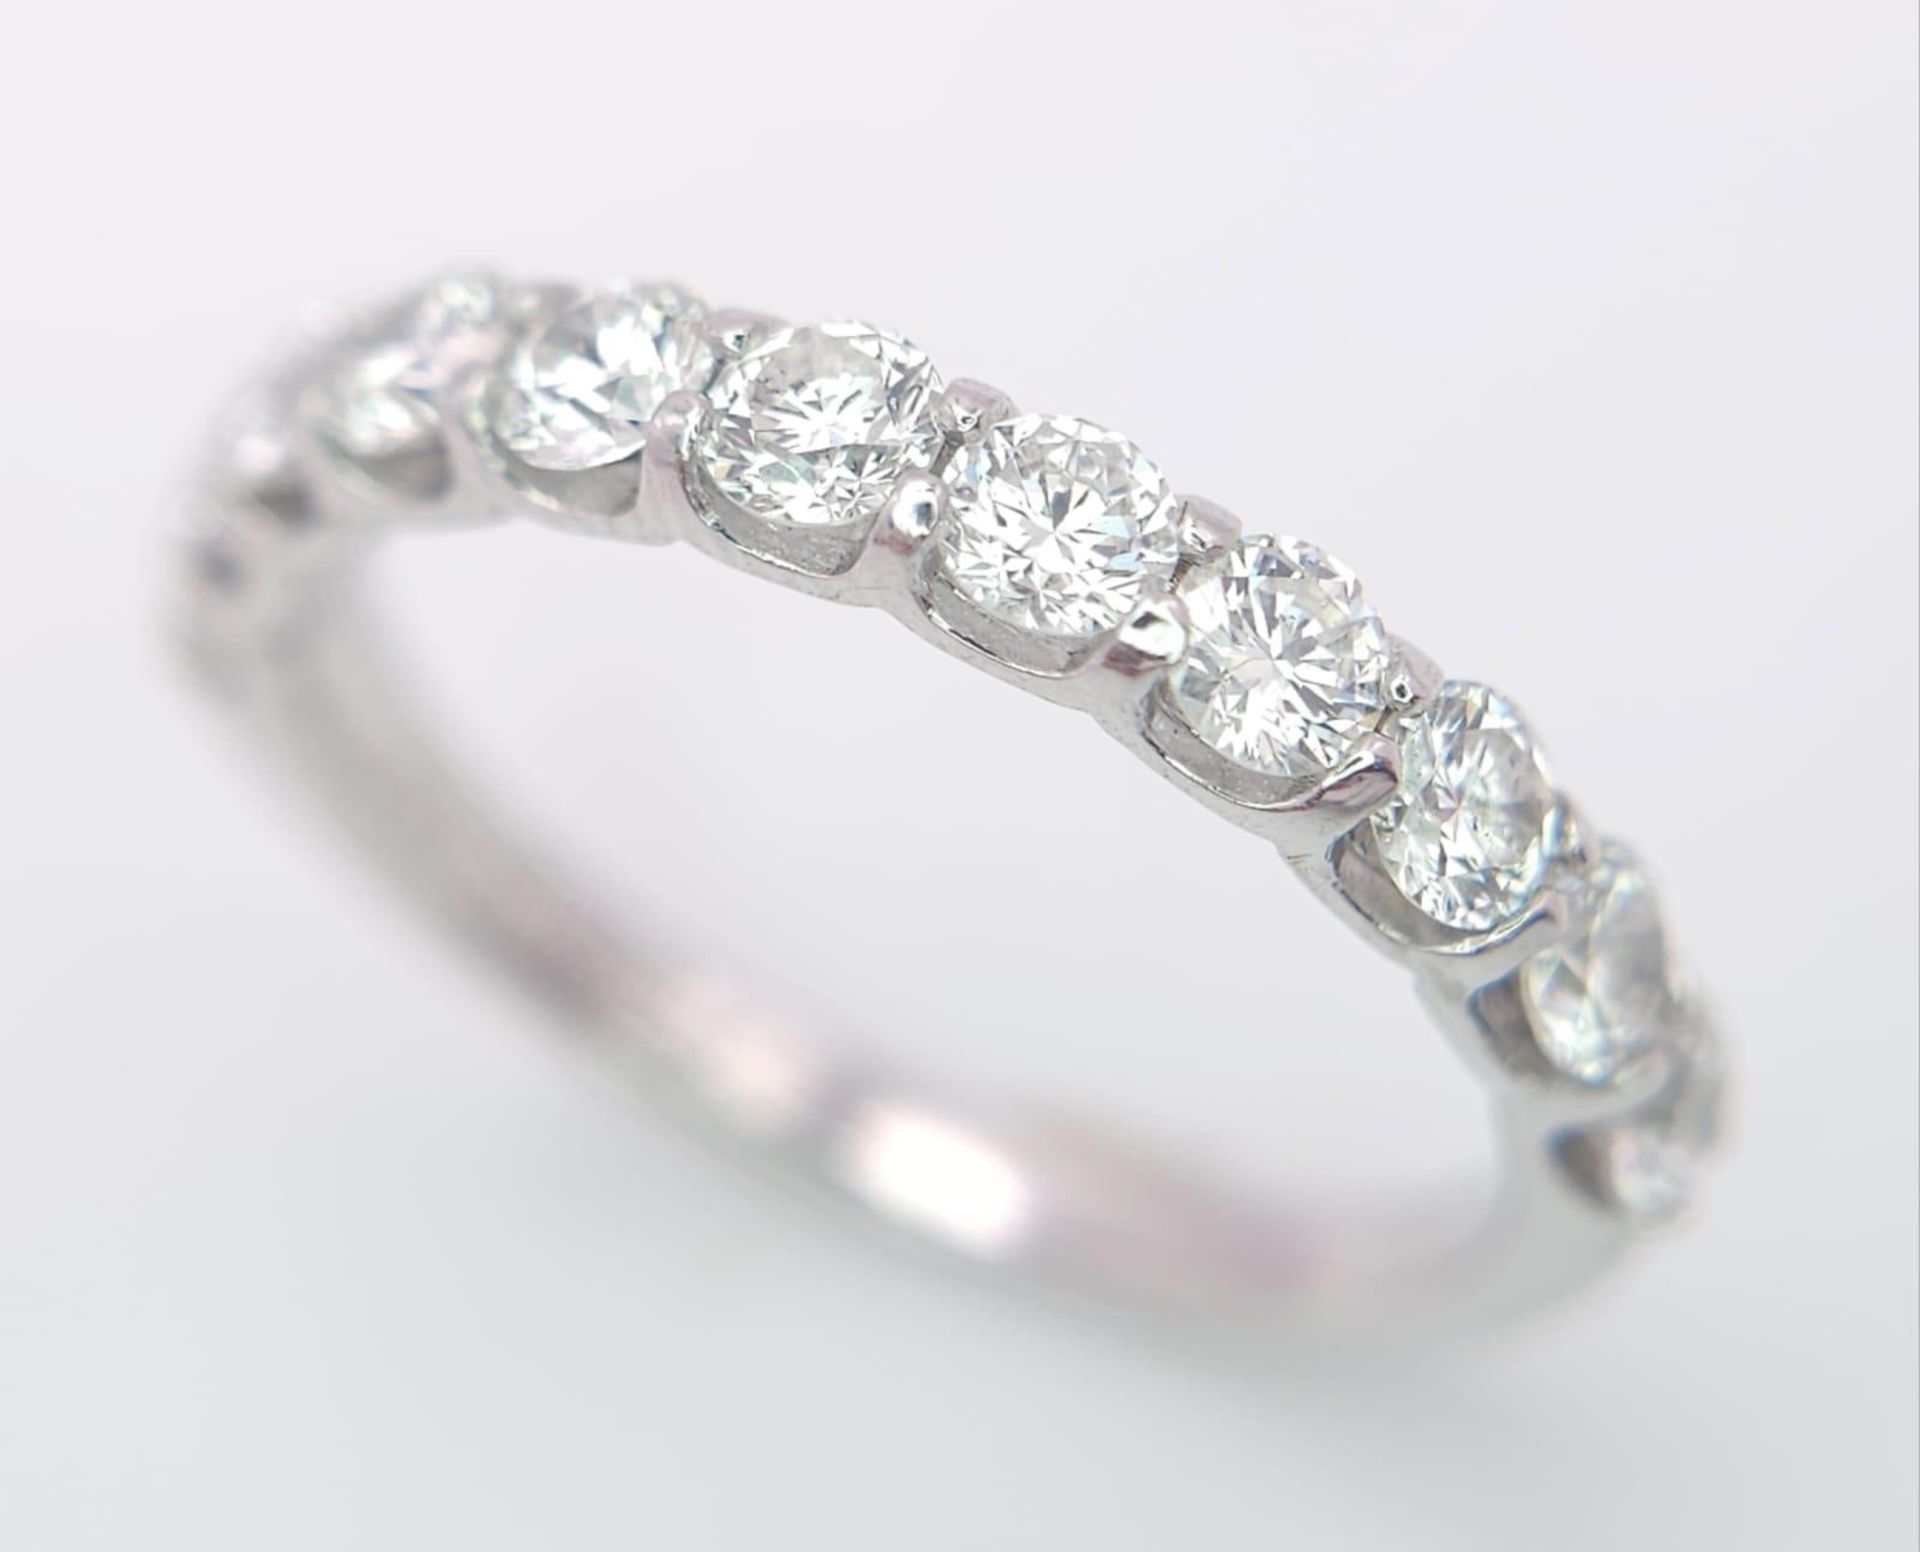 An 18 K white gold half eternity ring with good quality brilliant cut diamonds. Size: O, weight: 2.9